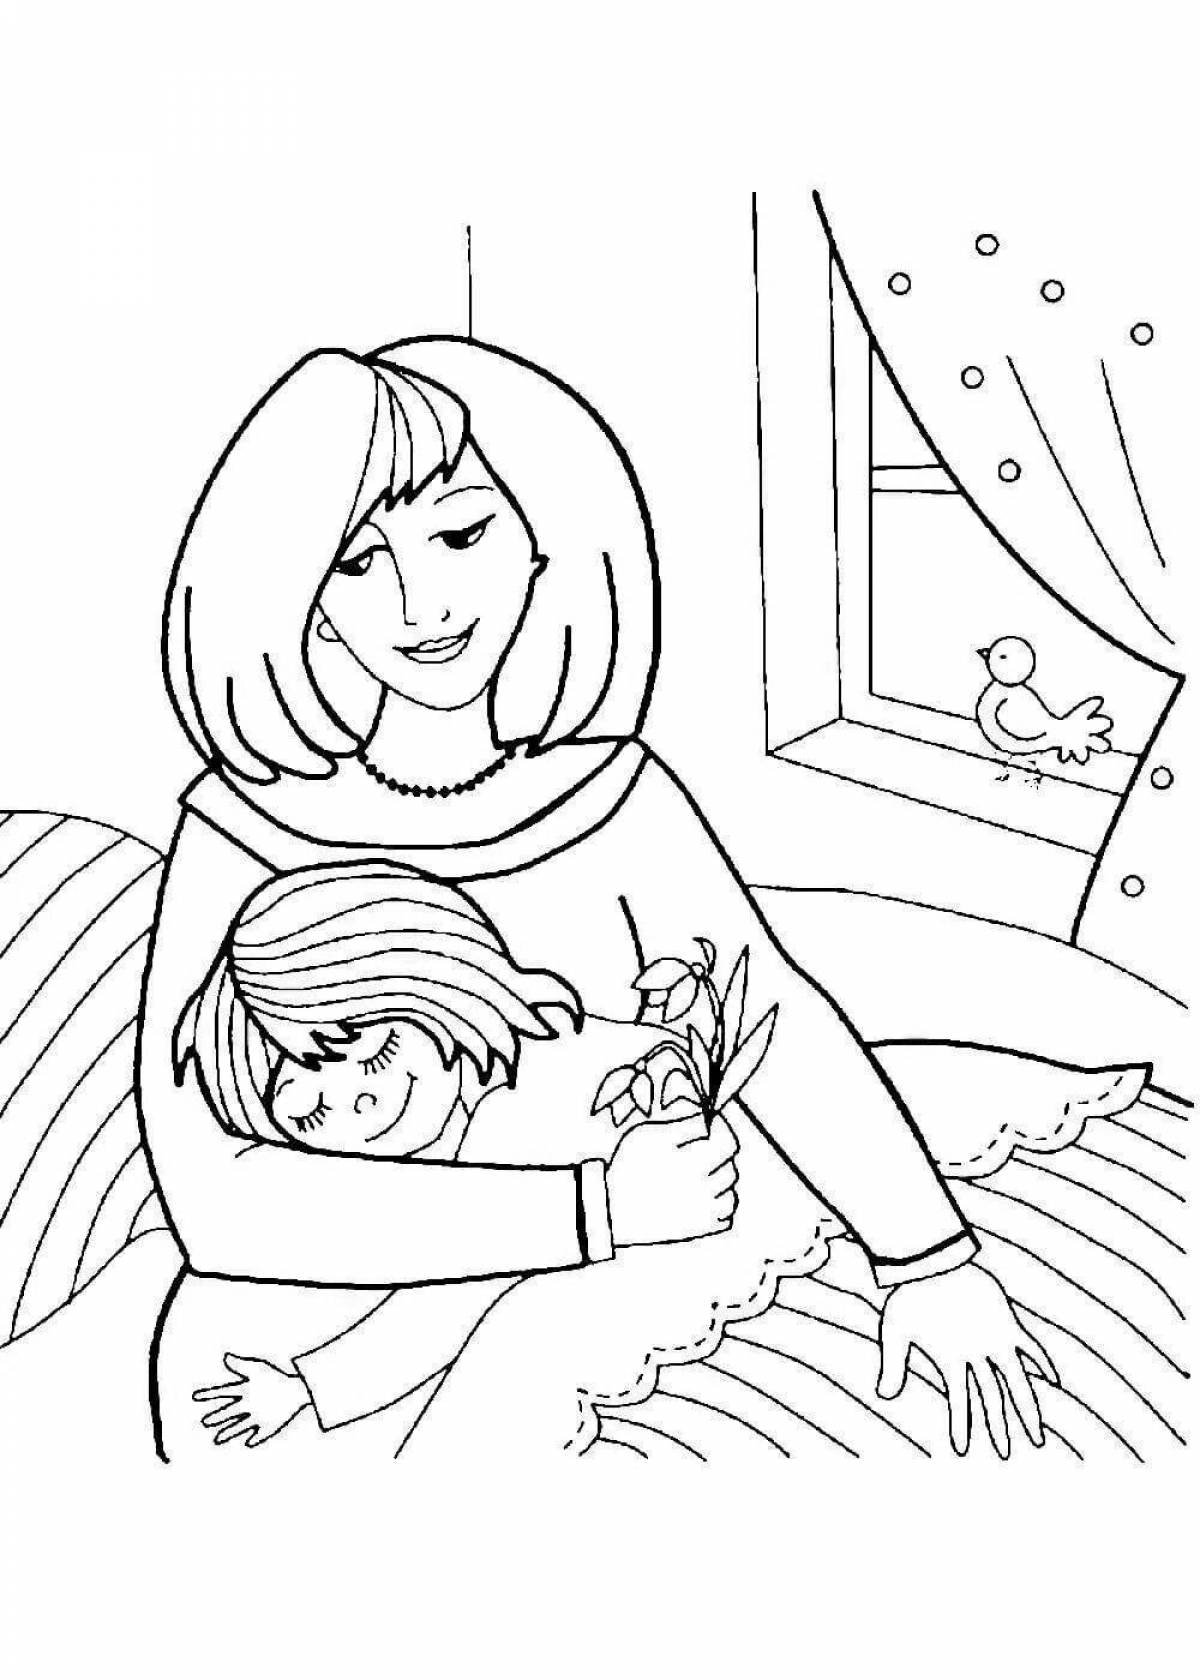 Exquisite mother and boy coloring book